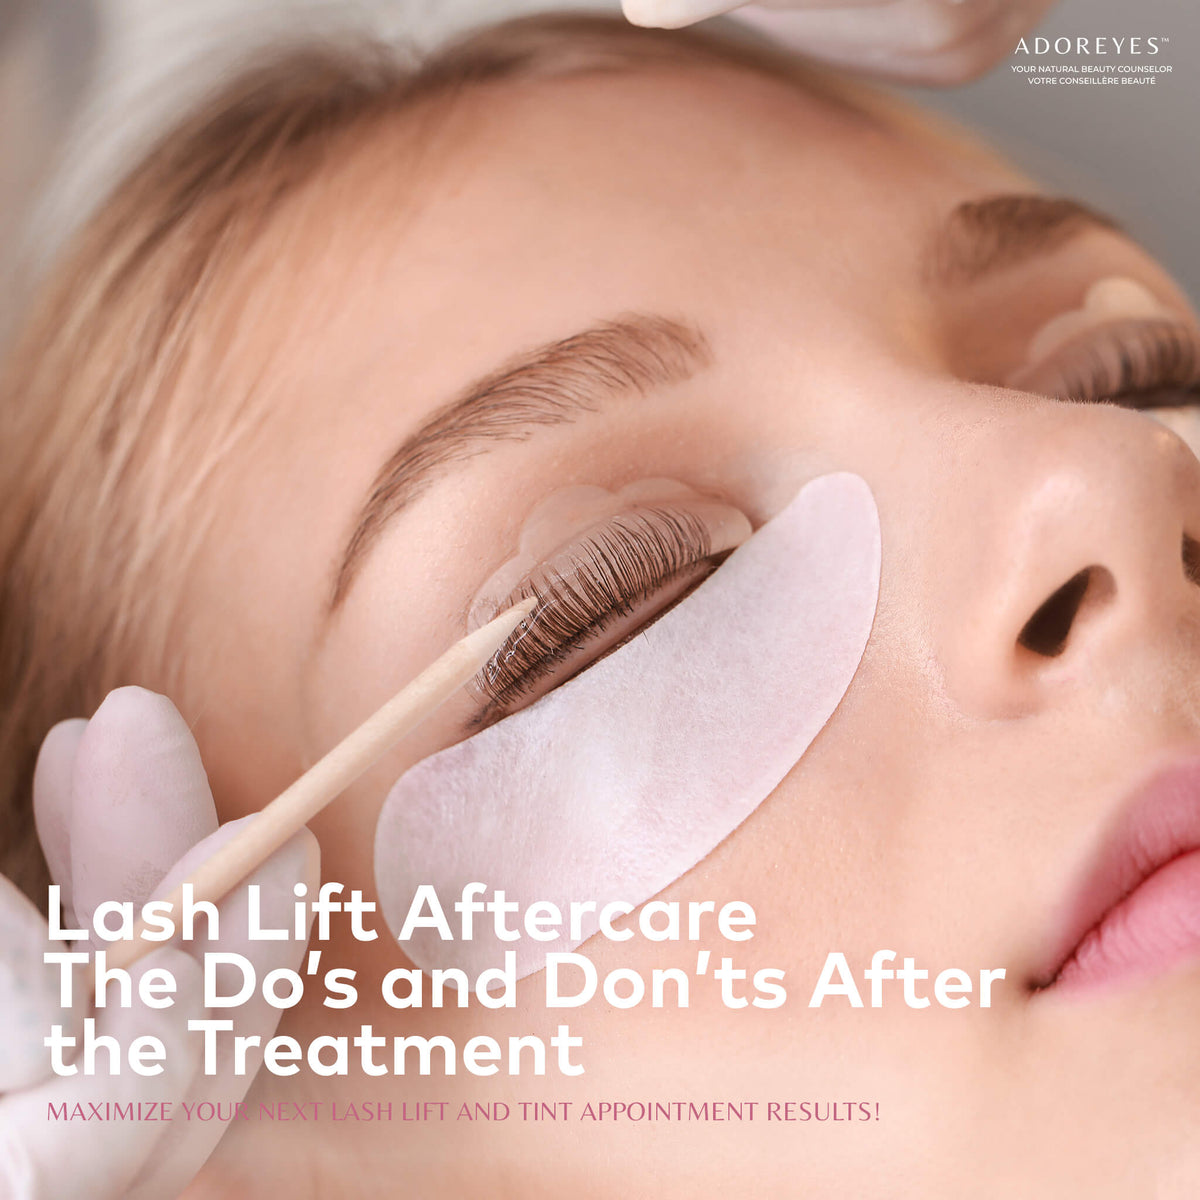 Lash Lift Aftercare - The Do's and Don'ts After the Treatment